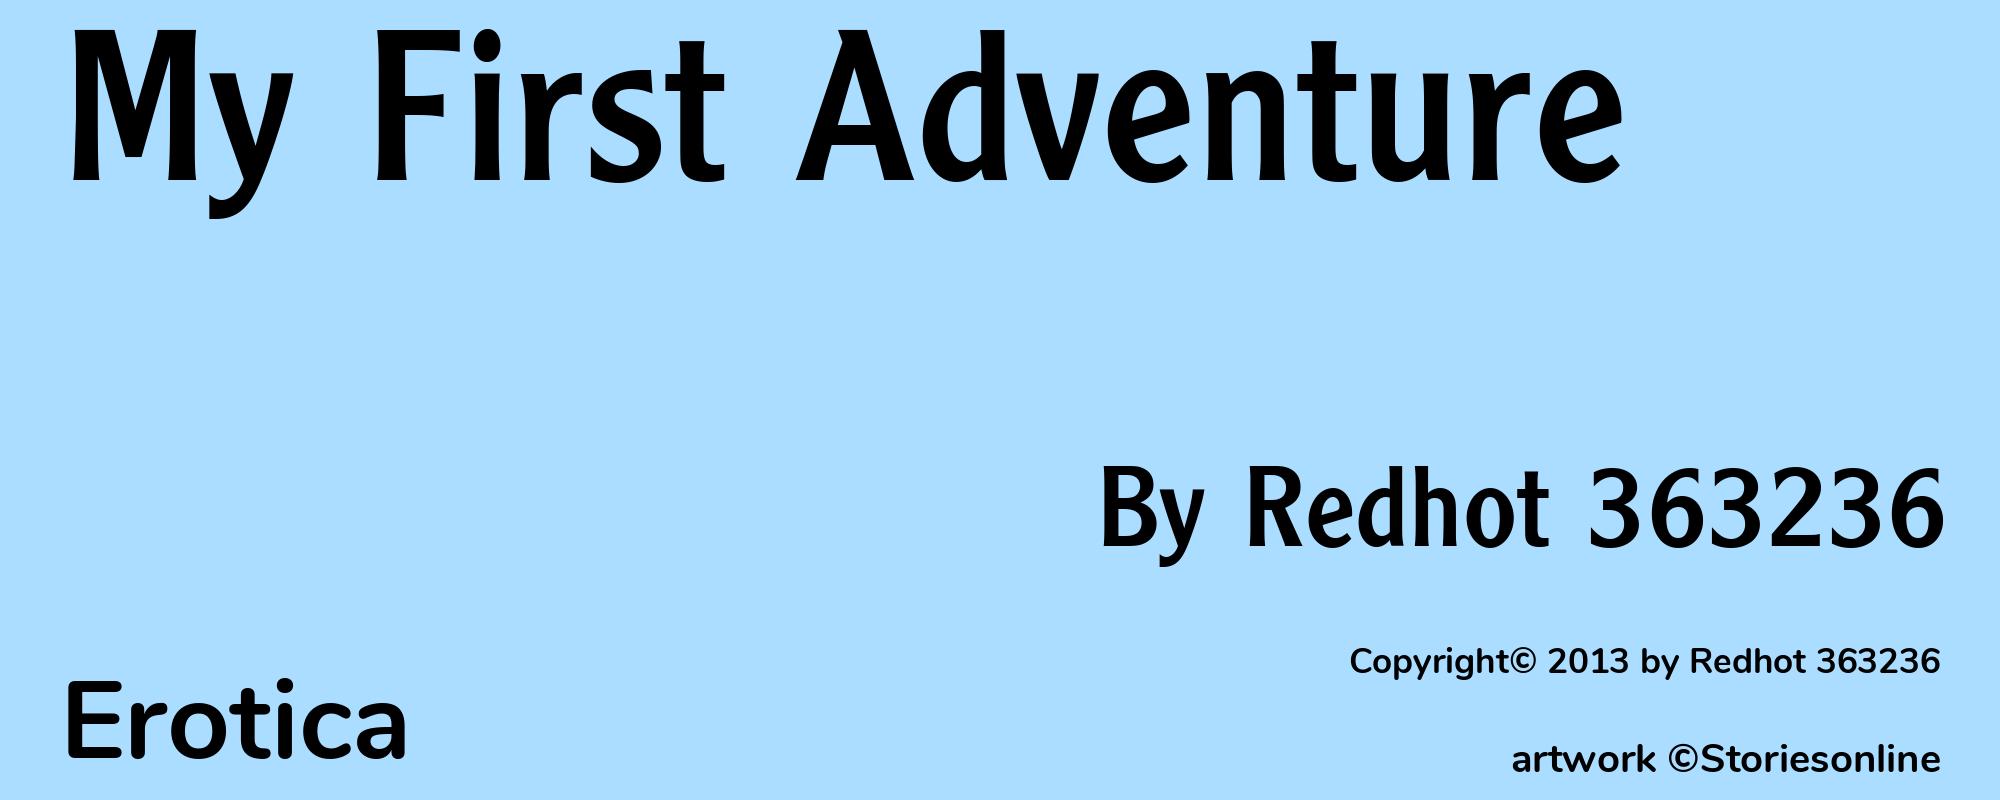 My First Adventure - Cover